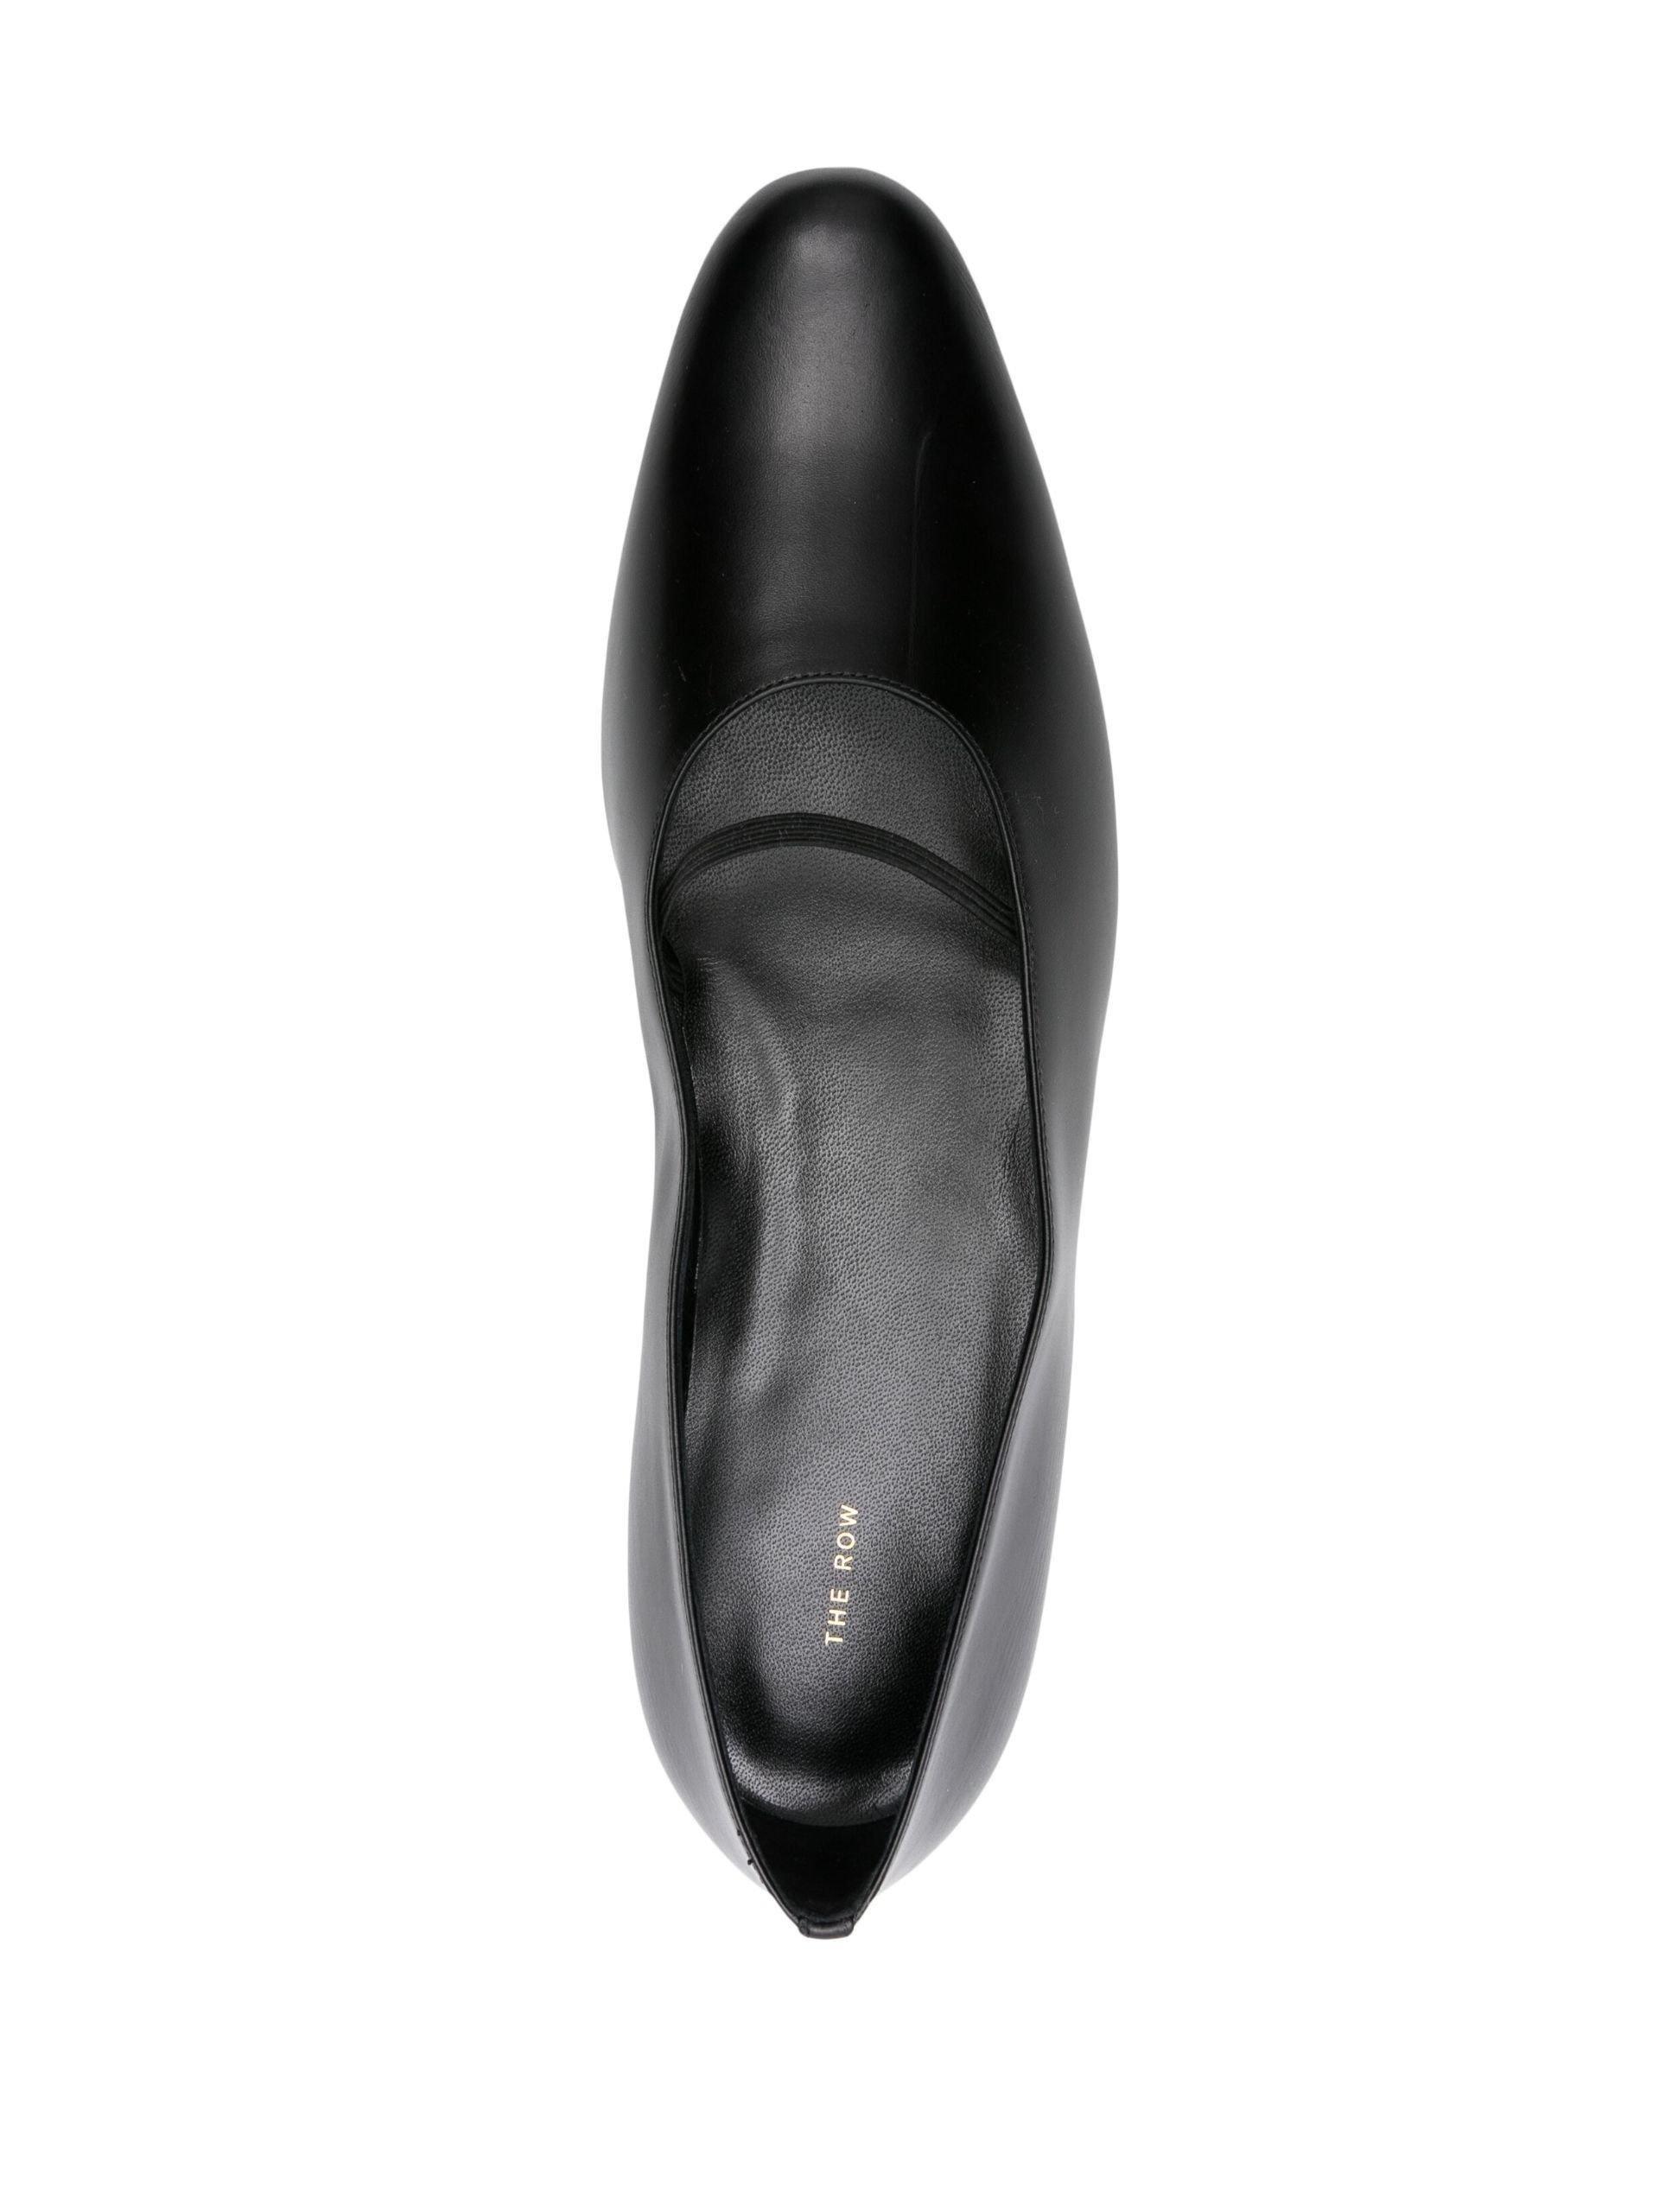 Black Marion Leather Ballerina Shoes - 4